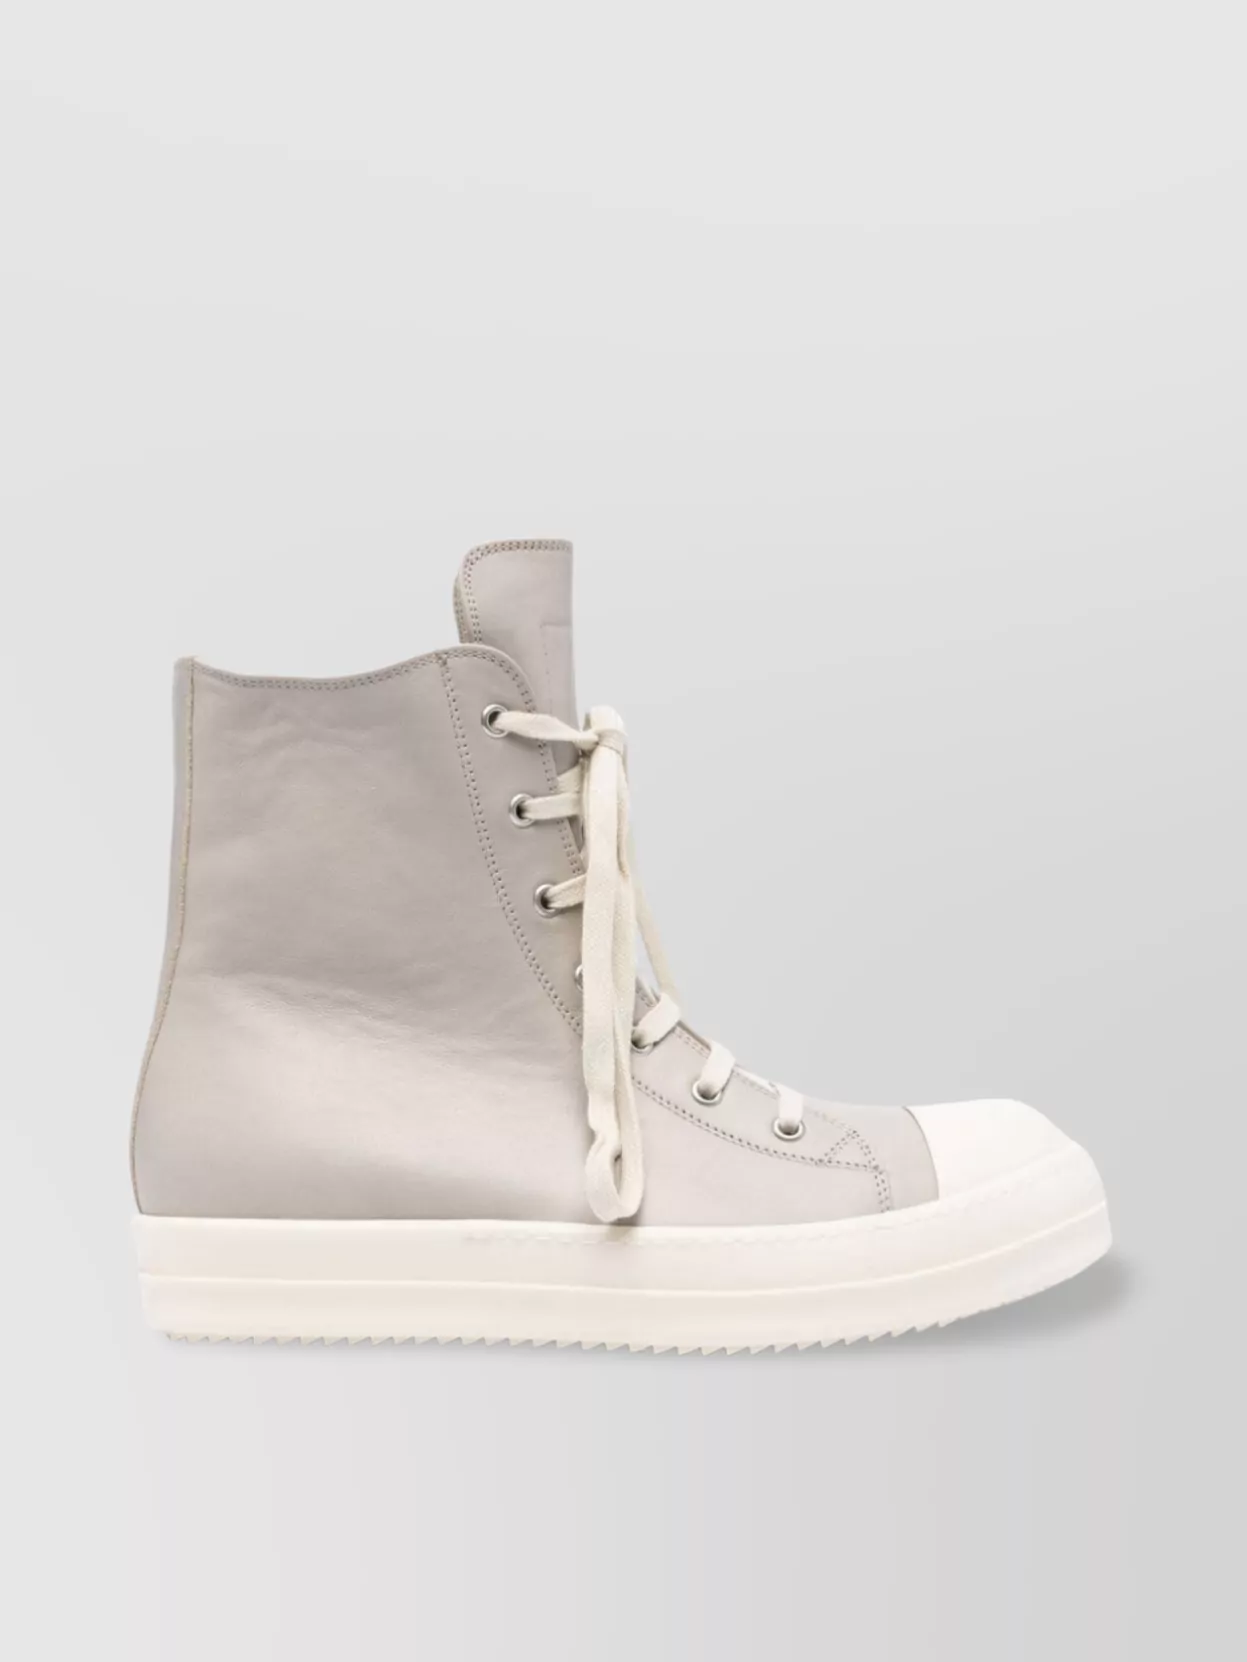 Shop Rick Owens Lido High-top Sneakers Featuring Shark-tooth Soles